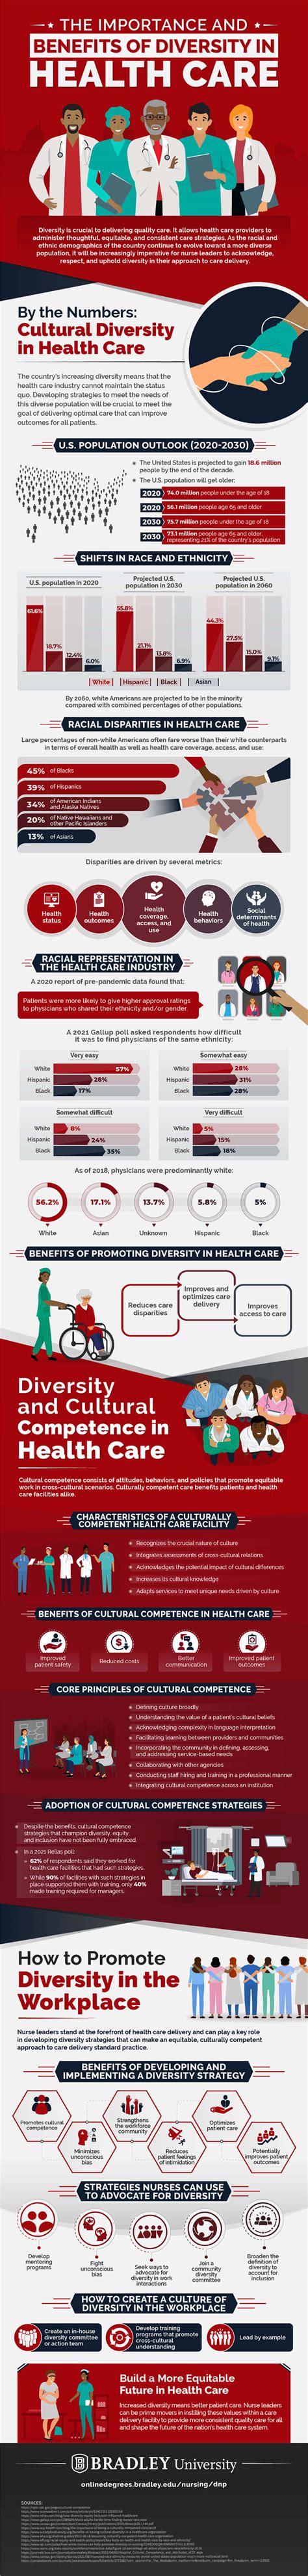 The Importance And Benefits Of Diversity In Health Care Bdu Online